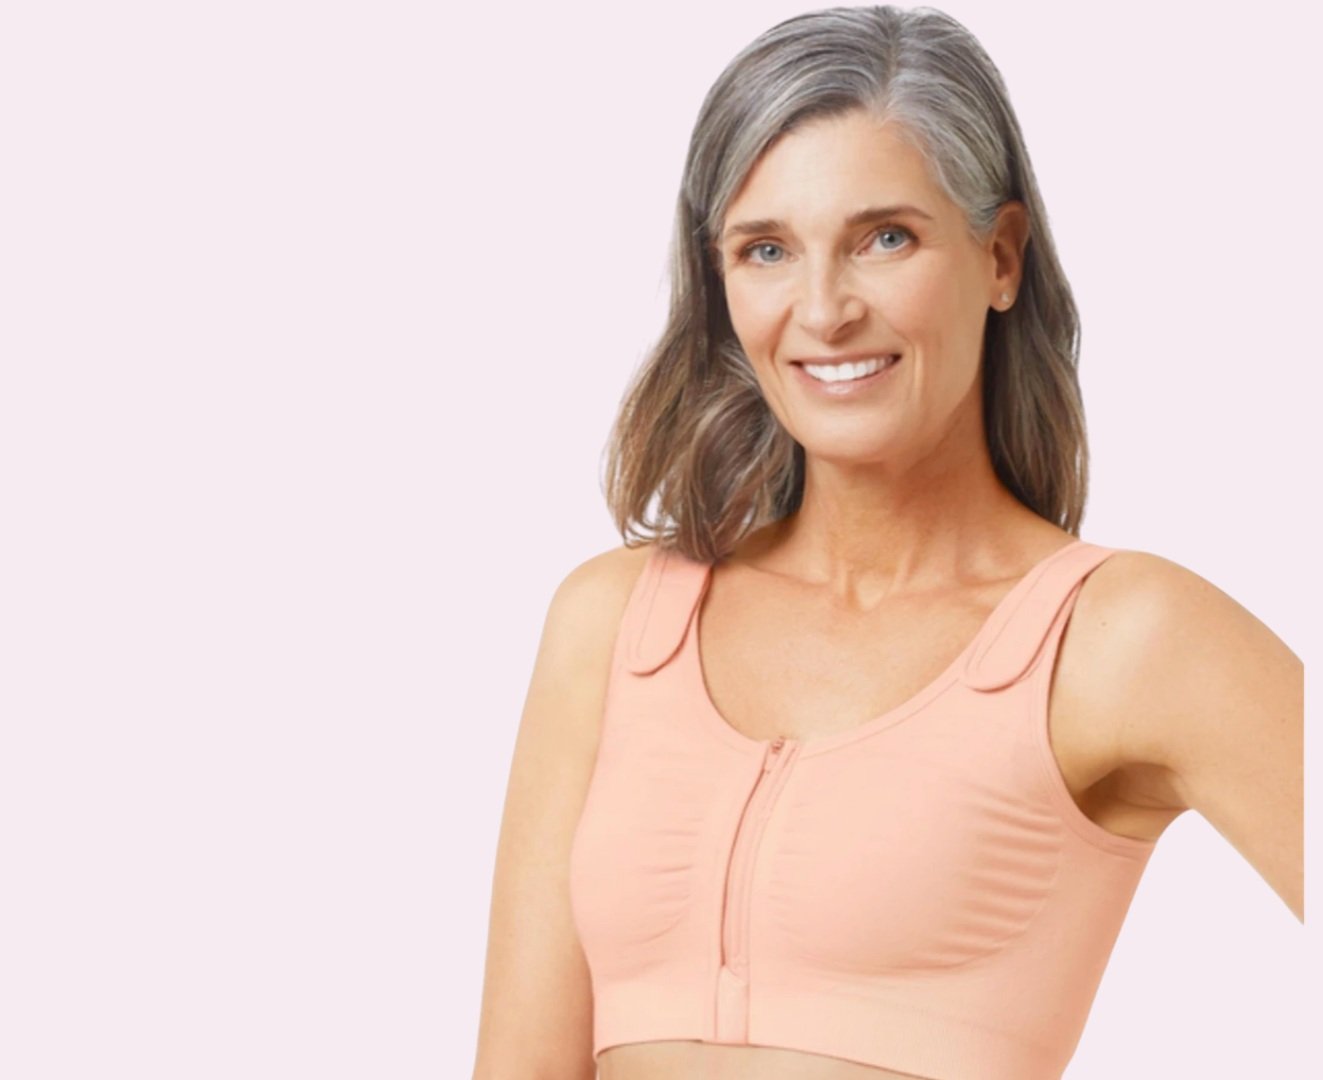 How Long Should I Wear My Surgical Bra After Breast Reduction